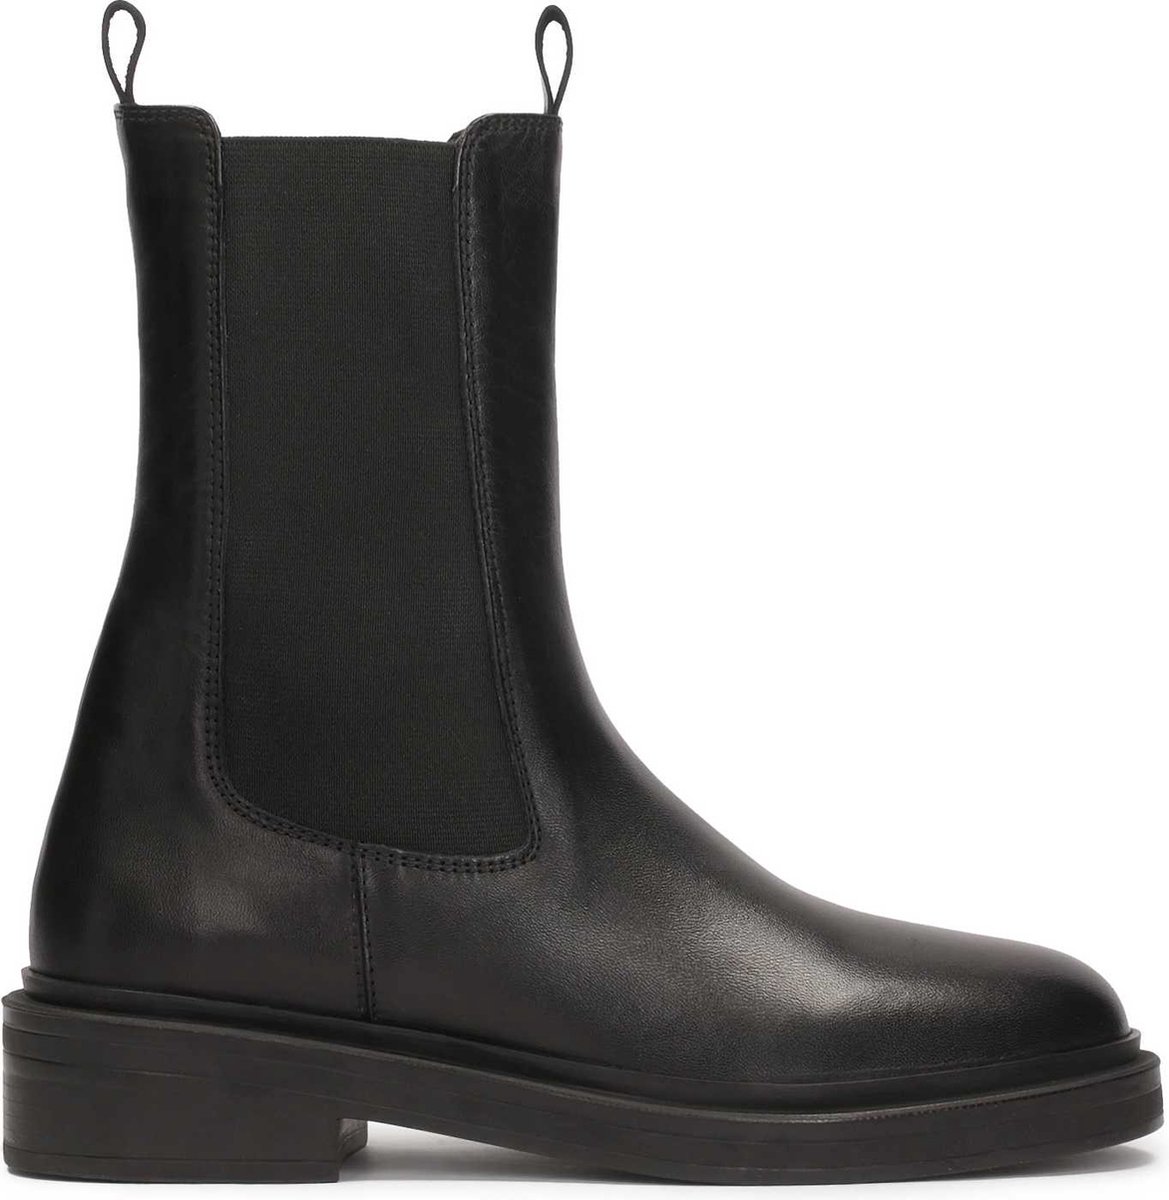 Kazar Leather Chelsea boots on a flat sole